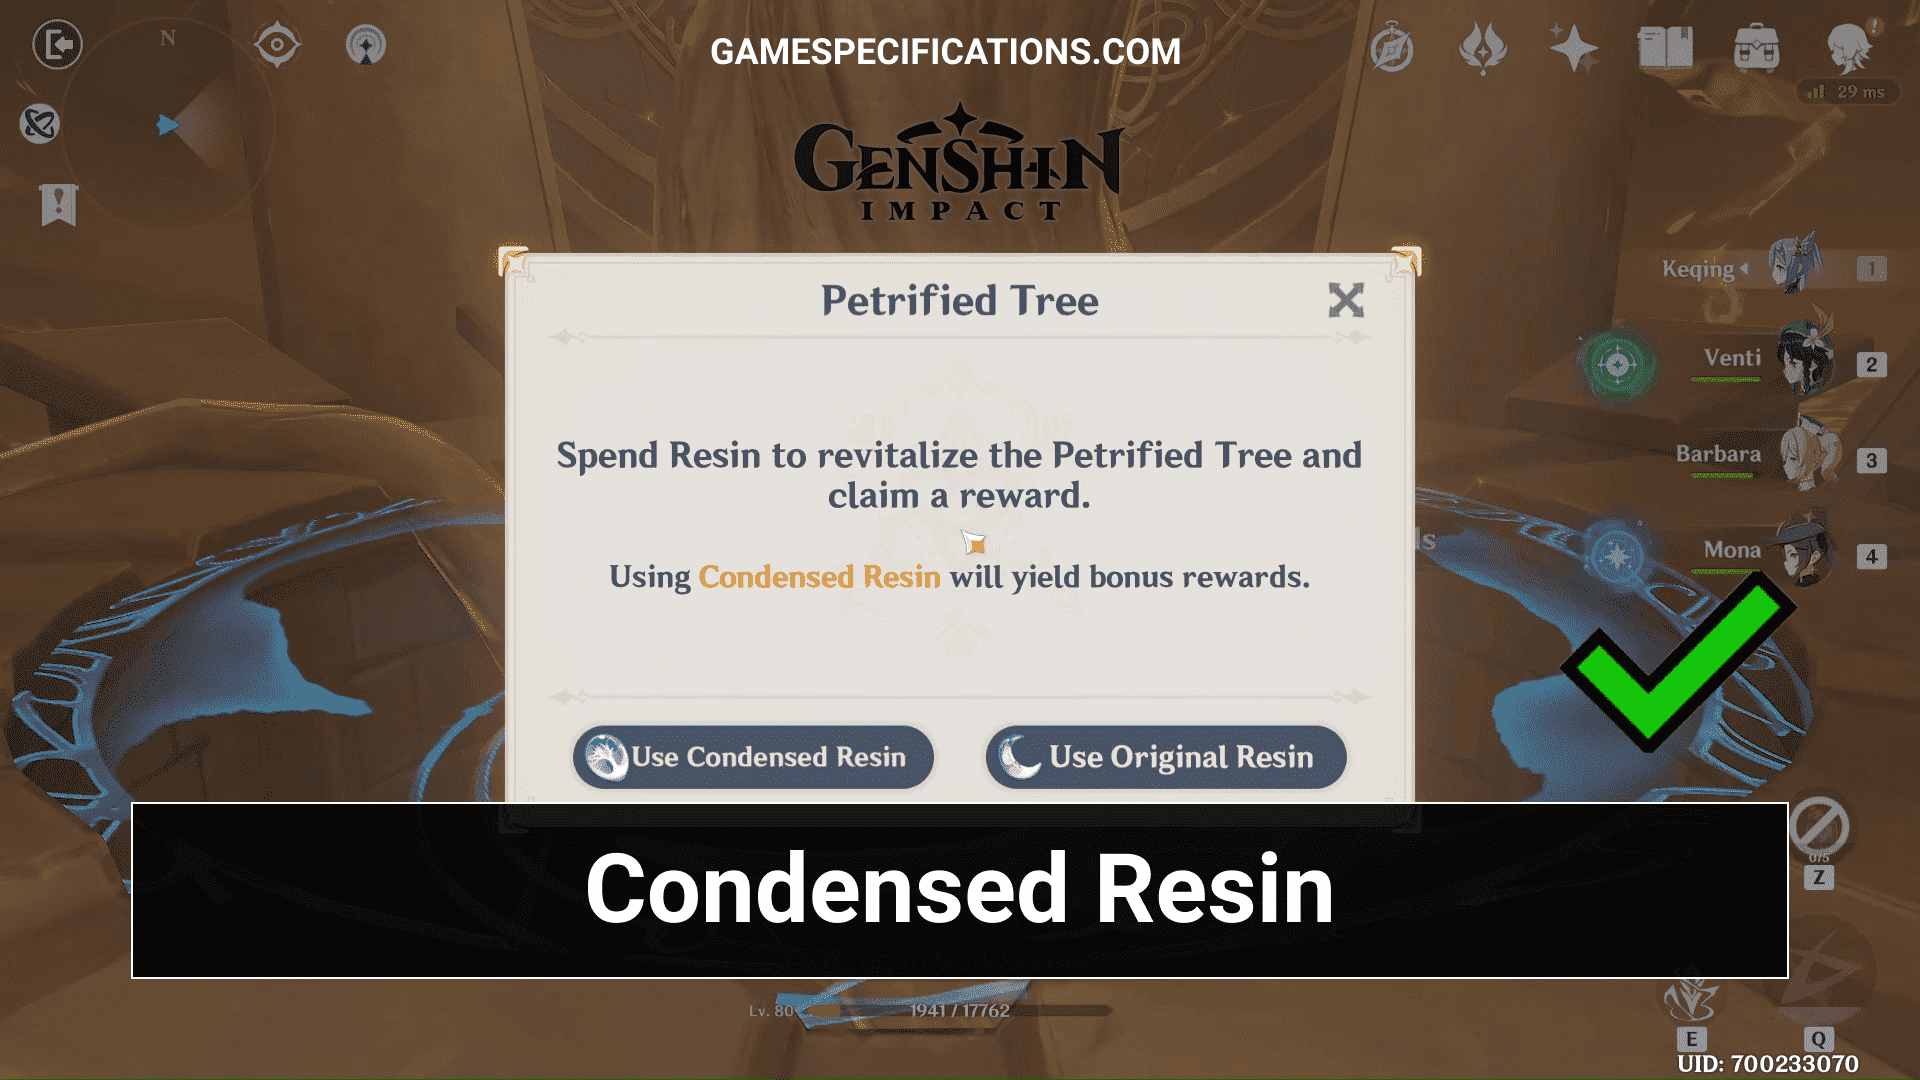 How To Use Genshin Impact Condensed Resin To Get Awesome Rewards?